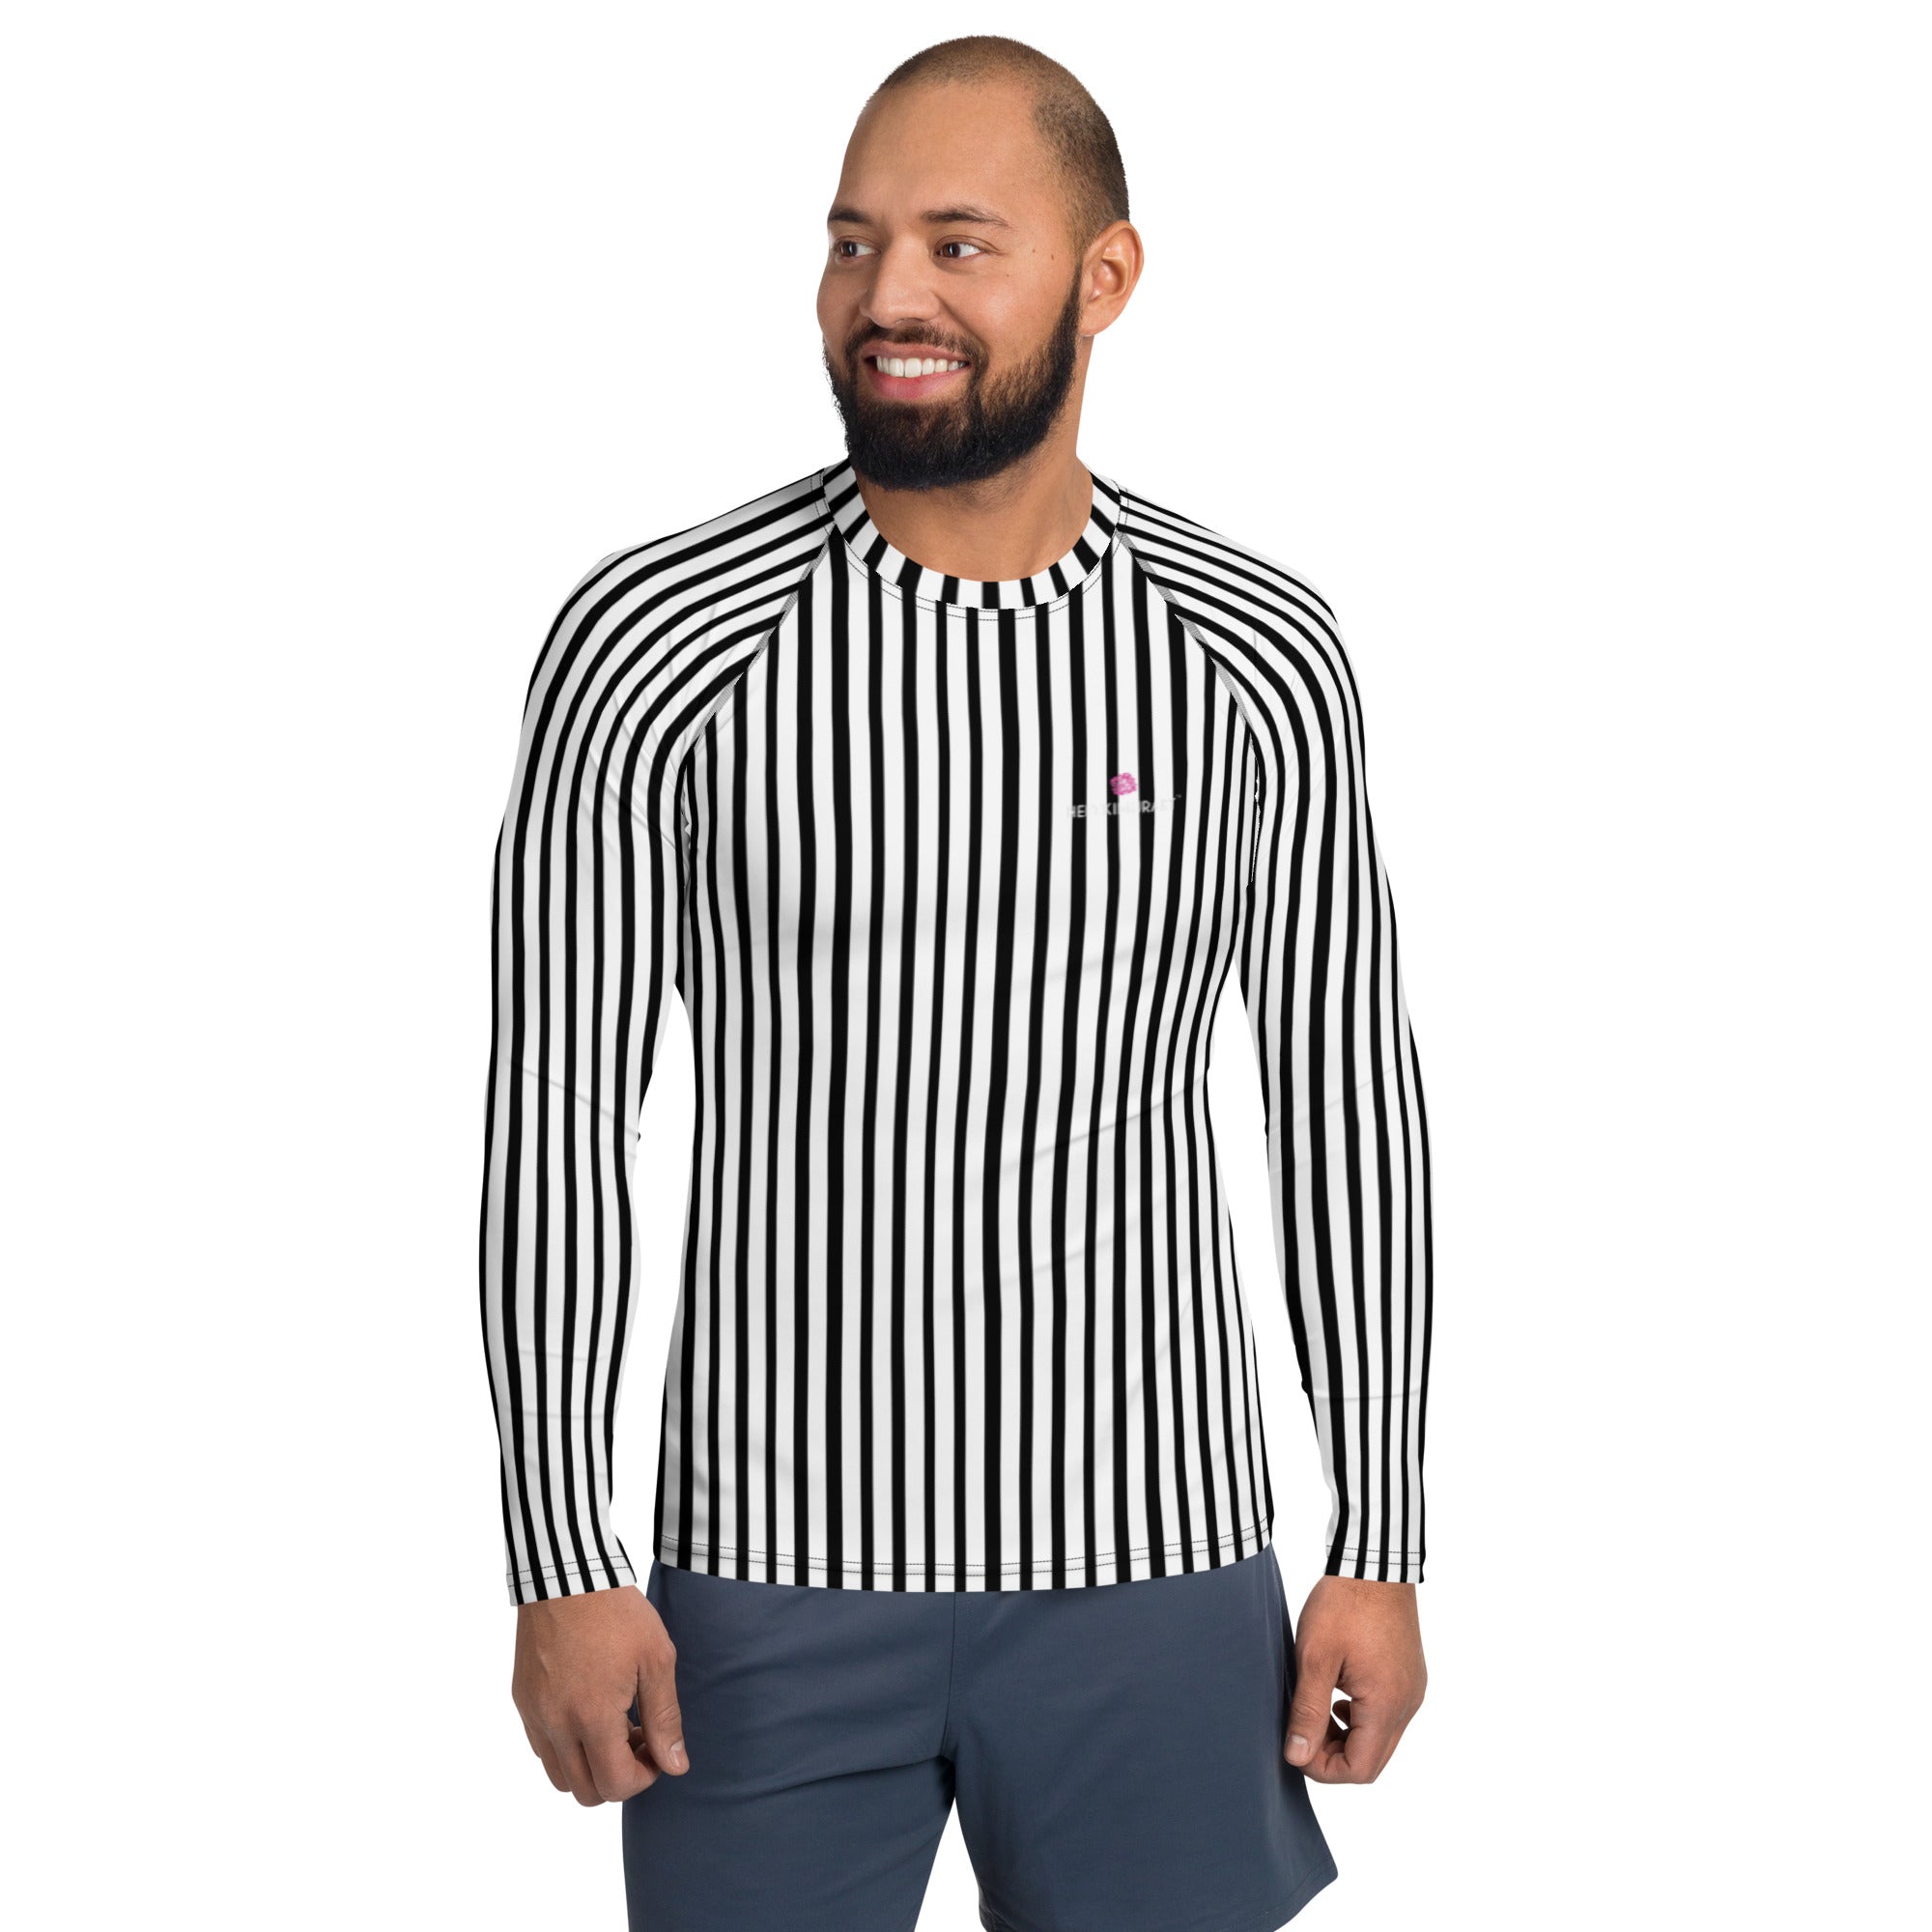 Black White Striped Men's Top, White Black Stripes Print Best Men's Rash Guard UPF 50+ Long Sleeves Fitted Designer Polyester Spandex Moisture-Wicking Four Way Stretch Elastic Sportswear For Water Sports Wear - Made in USA/EU/MX (US Size: XS-3XL)